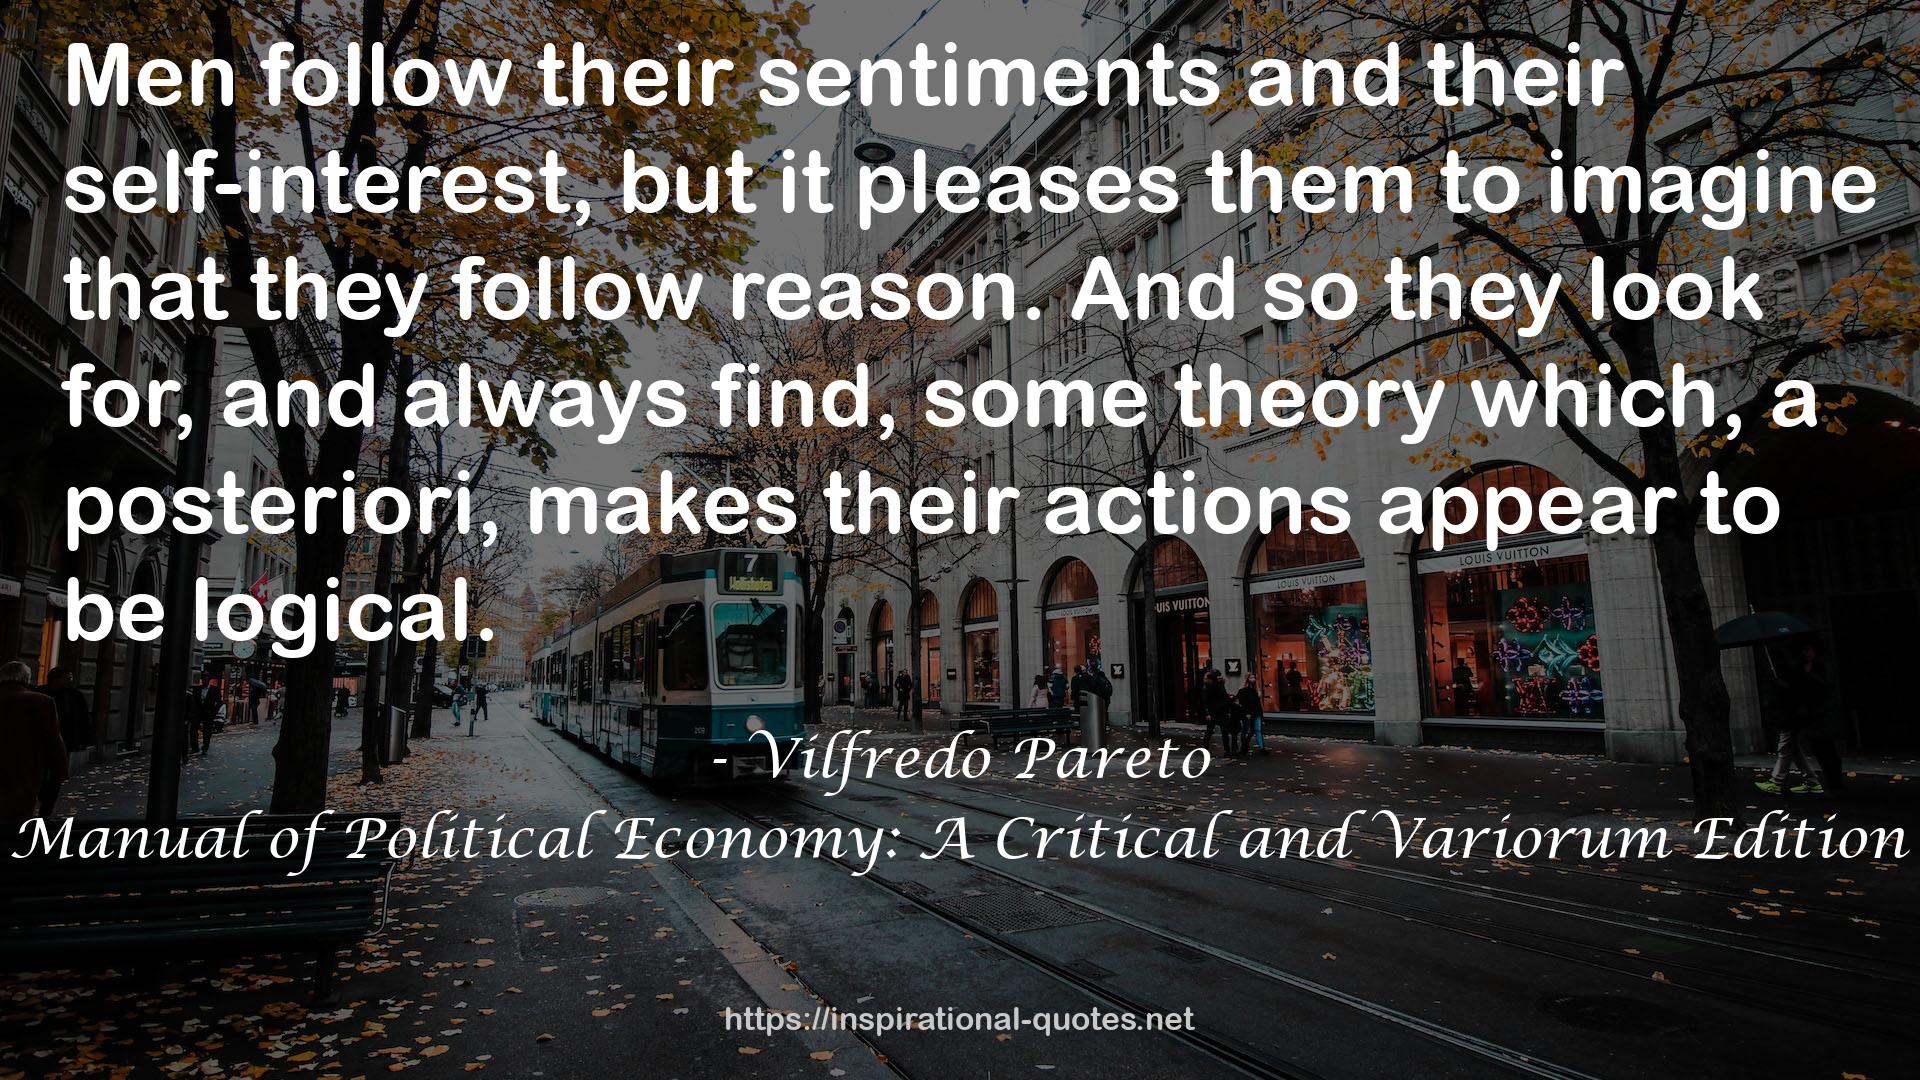 Manual of Political Economy: A Critical and Variorum Edition QUOTES